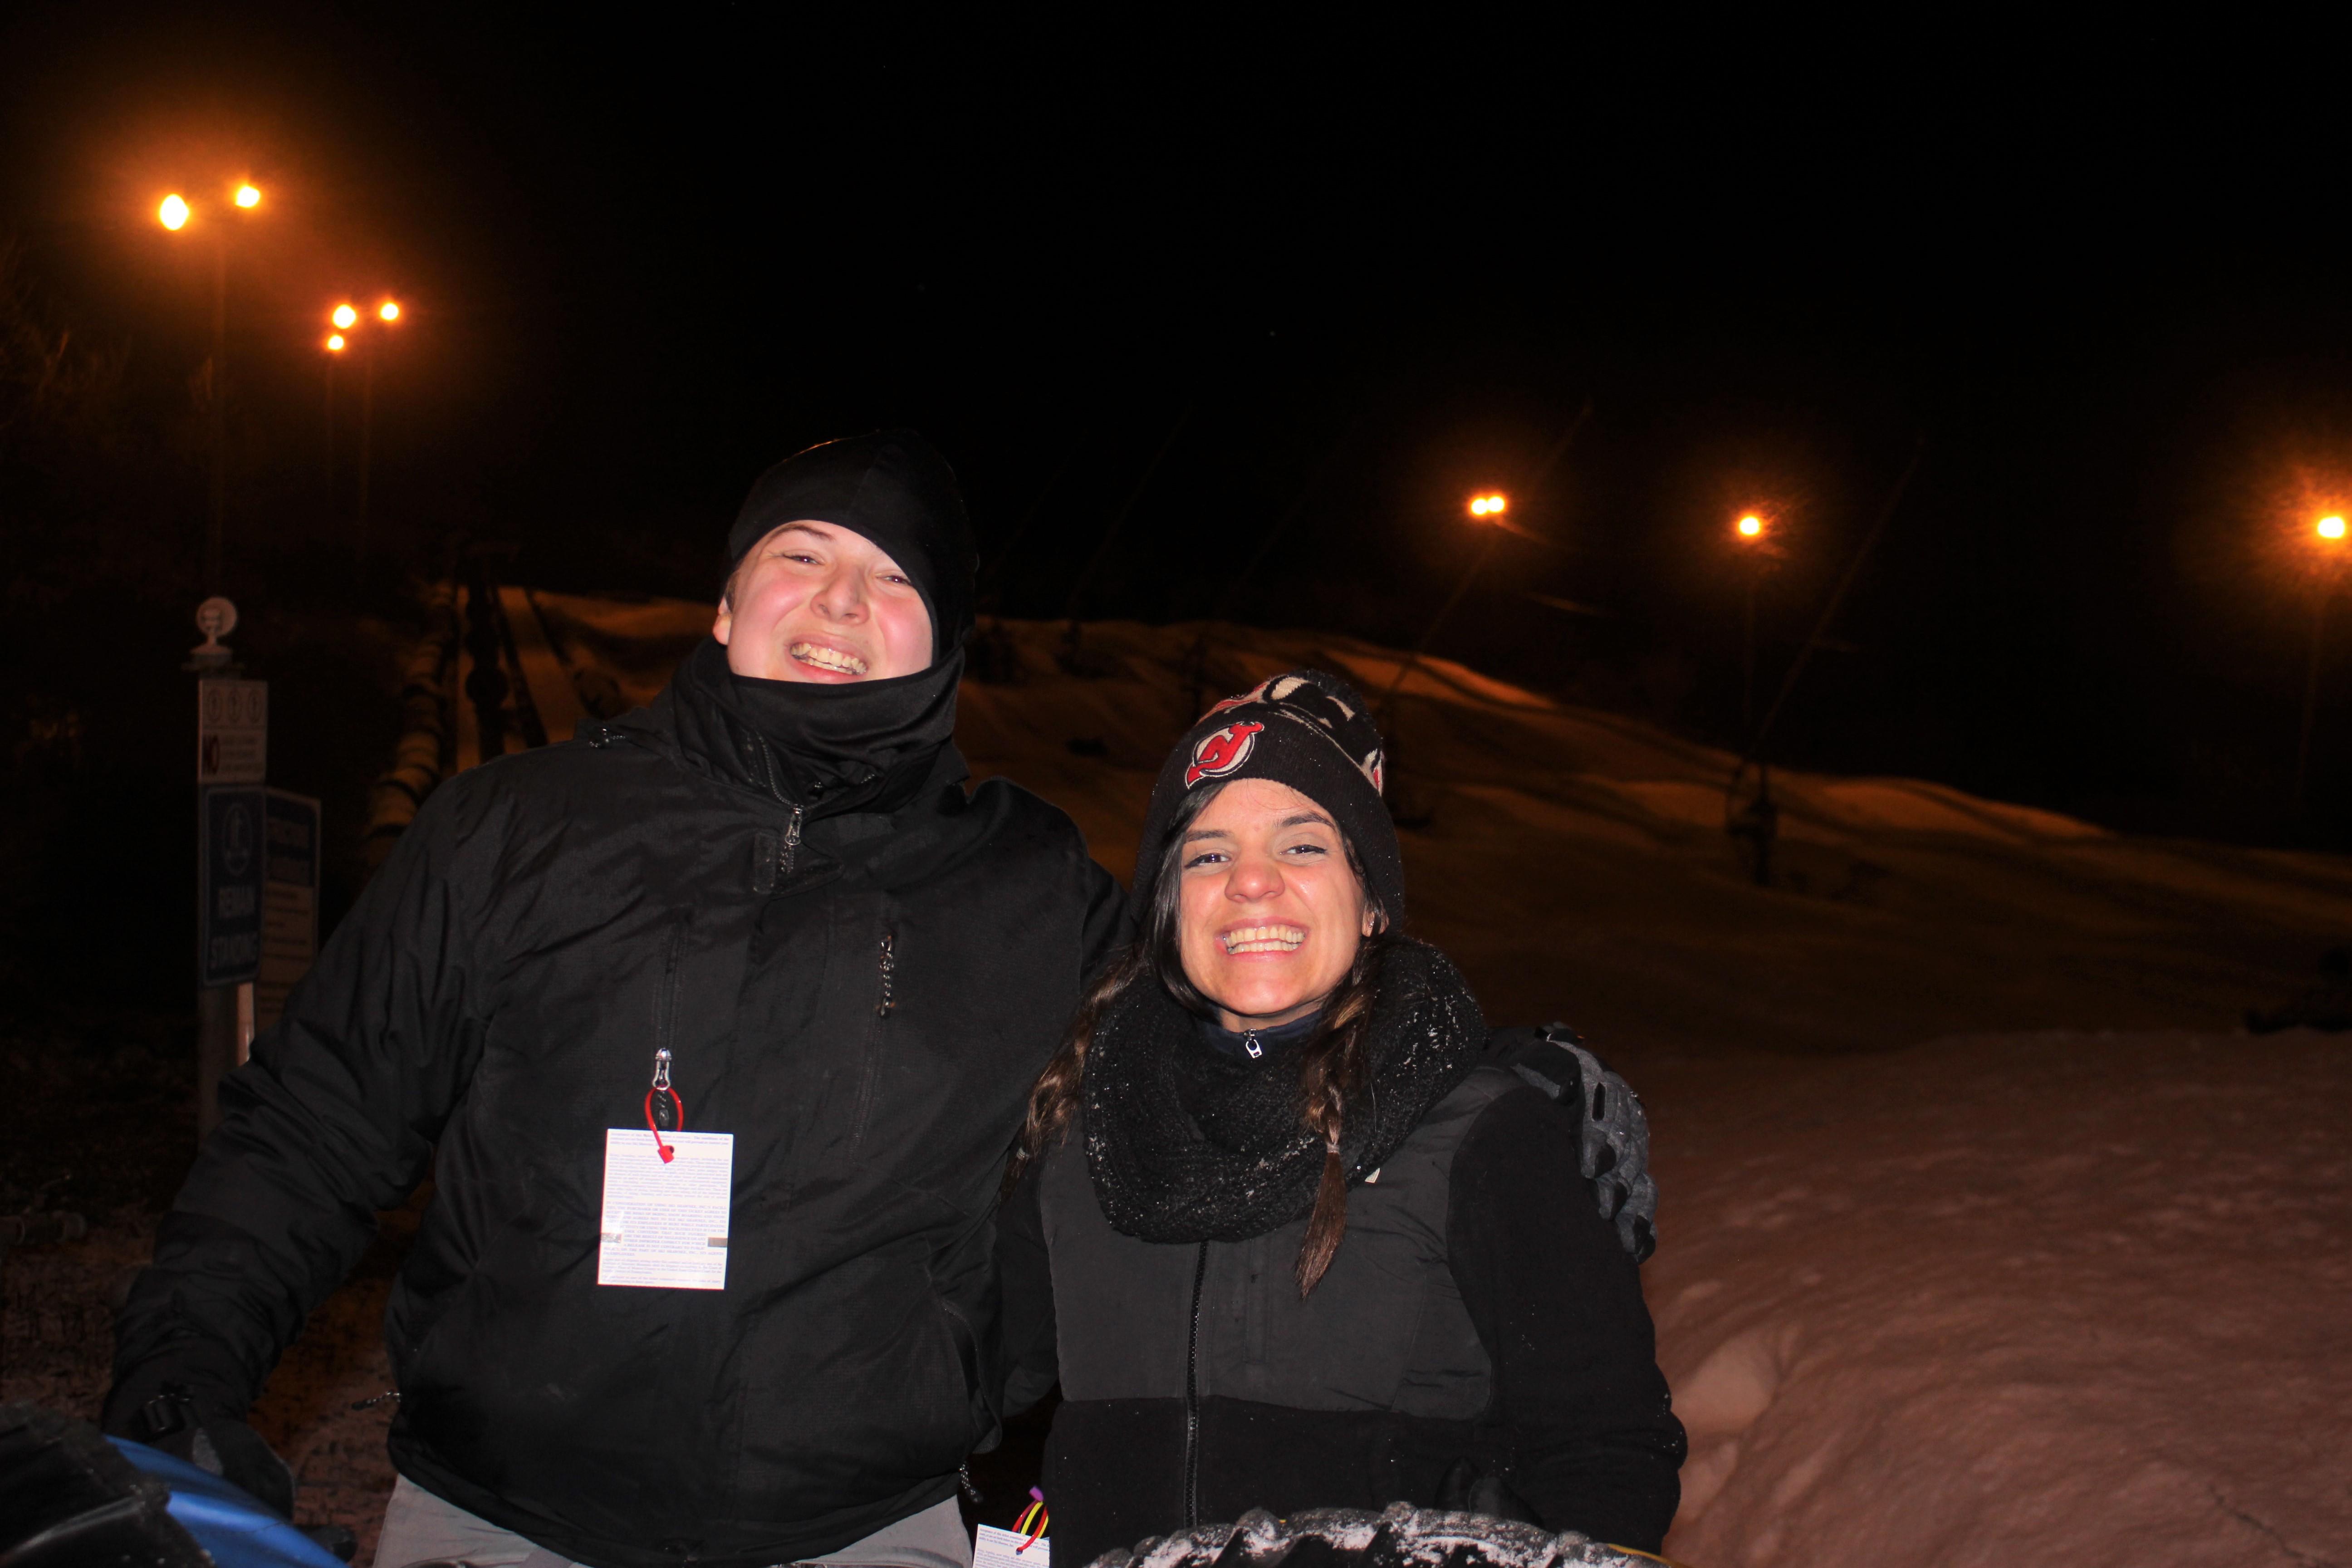 Student and teacher on snow tubing trip